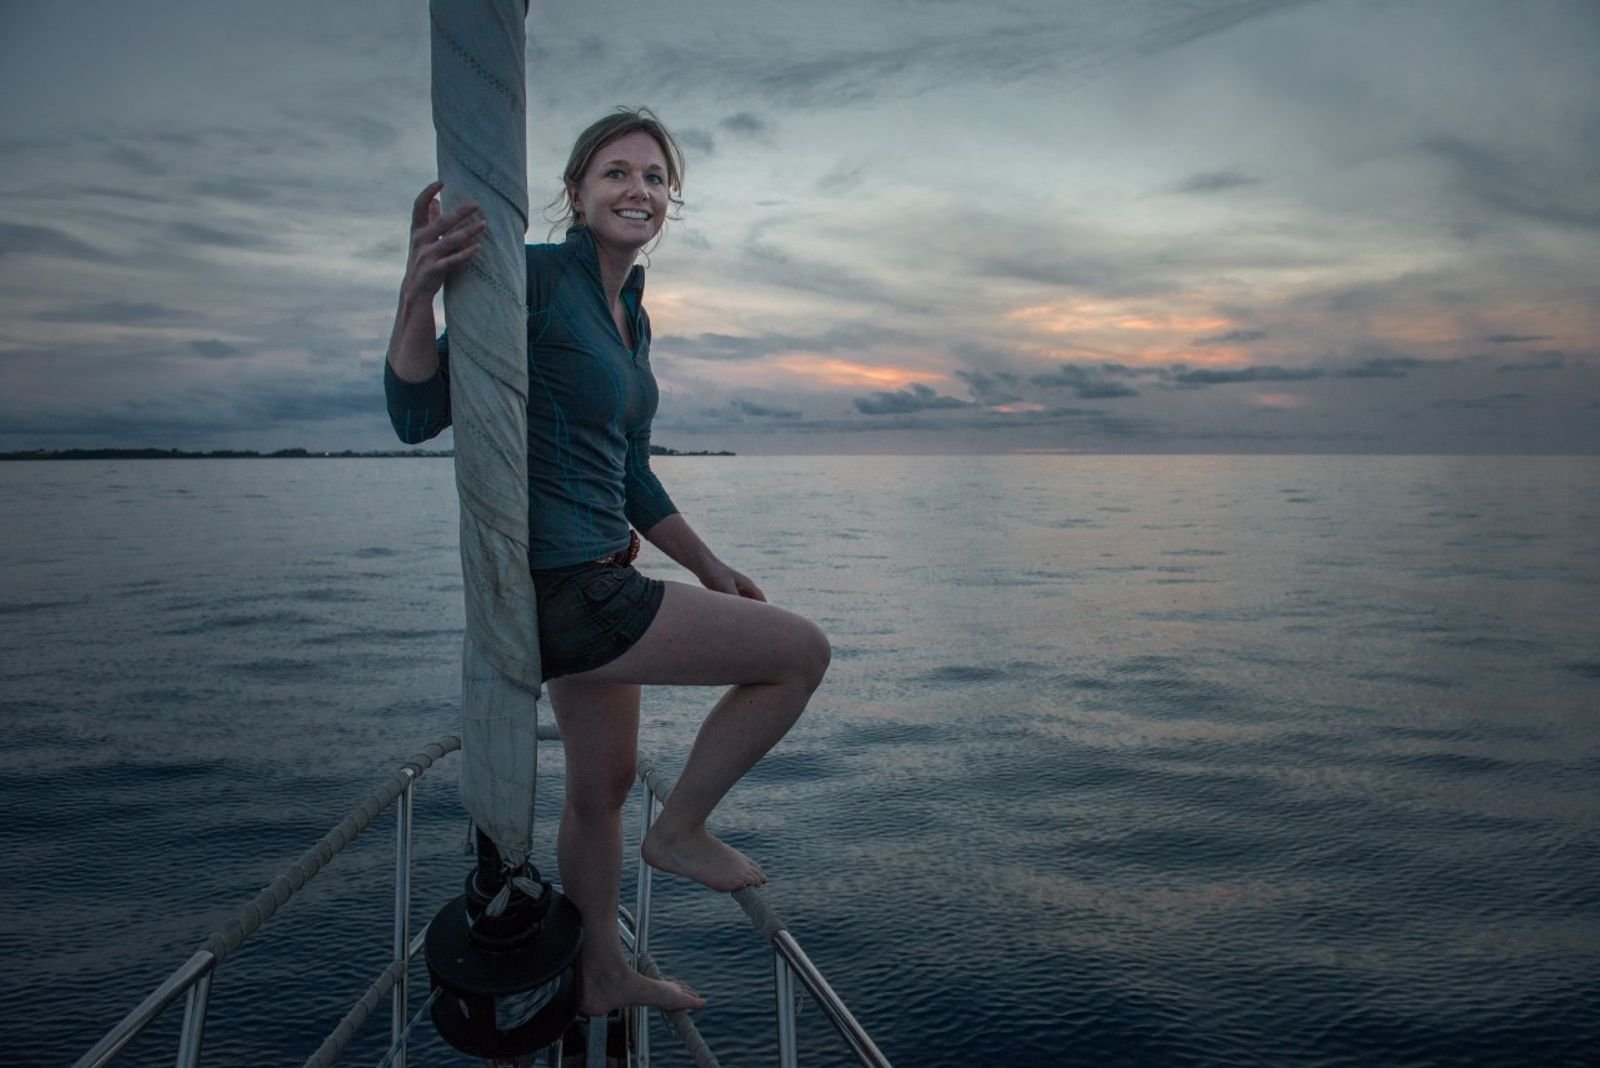 “My philosophy to life has been shaped by the ocean.“ Emily Penn, sailor and environmentalist